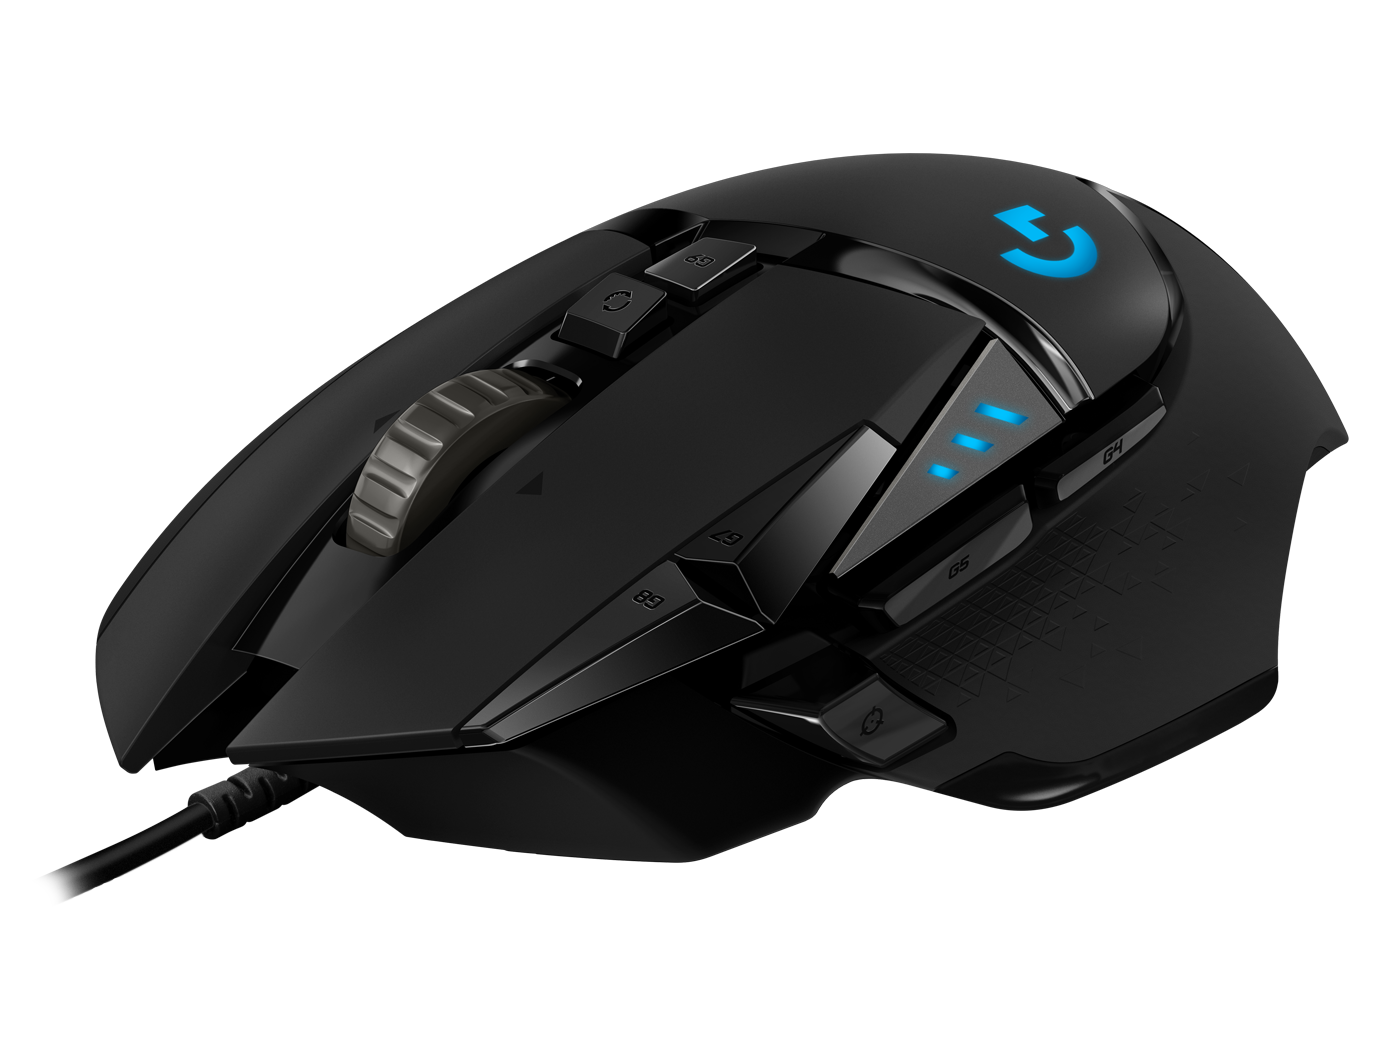 How to Install Logitech Mouse G502 Hero Software on Debian - Featured